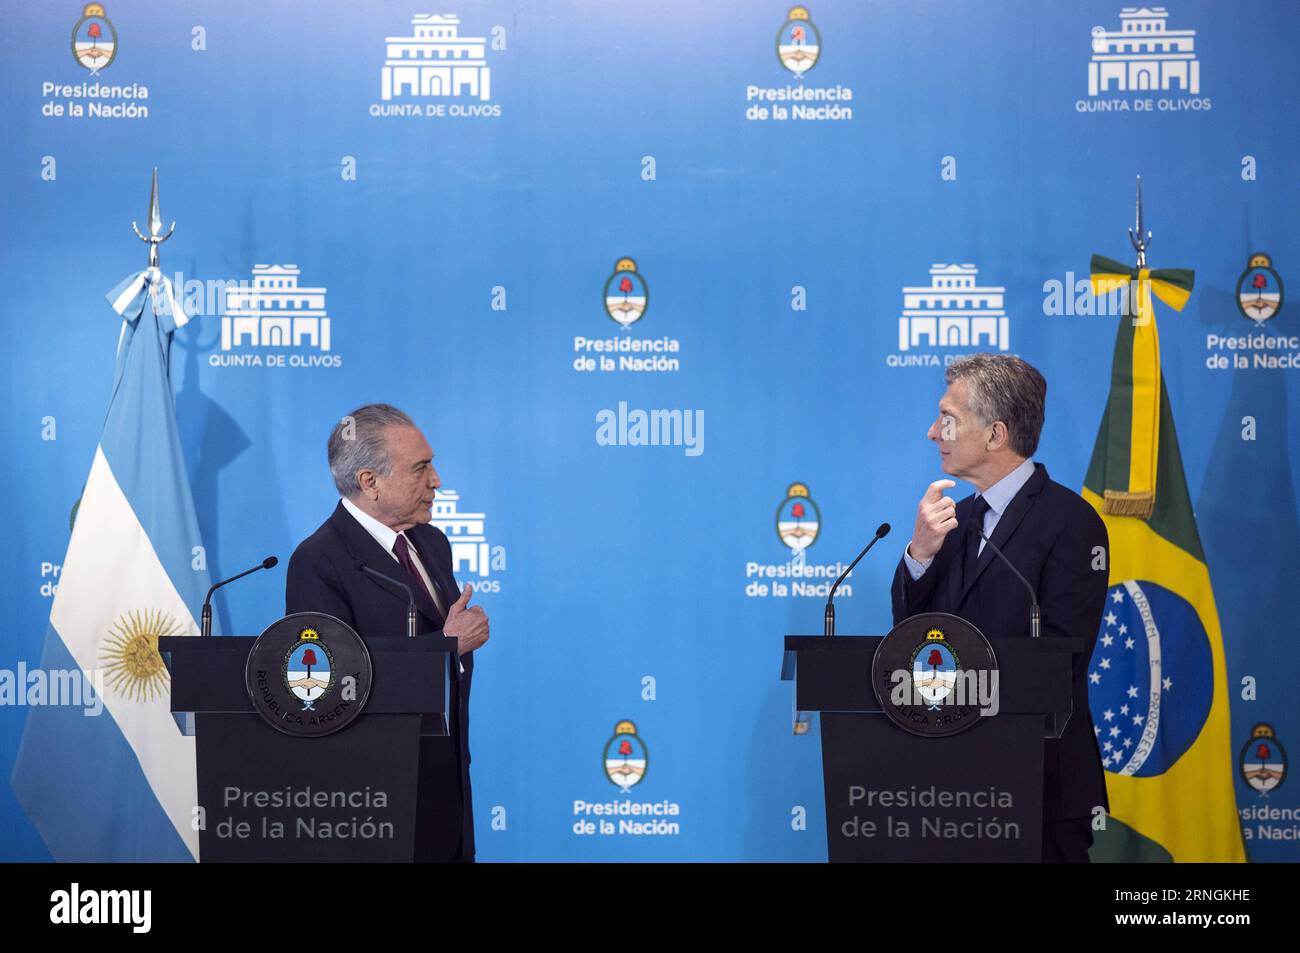 (161004) -- OLIVOS, Oct. 4, 2016 -- Argentine President Mauricio Macri (R) and Brazilian President Michel Temer attend a joint press conference after their meeting in Olivos, Buenos Aires, Argentina, on Oct. 3, 2016. Argentine President Mauricio Macri and his Brazilian counterpart Michel Temer said Monday that the Southern Common Market (Mercosur) needed to be strengthened in order to become a platform of global commercial integration. ) (dtf) ARGENTINA-OLIVOS-BRAZIL-POLITICS-VISIT MARTINxZABALA PUBLICATIONxNOTxINxCHN   Olivos OCT 4 2016 Argentine President Mauricio Macri r and Brazilian Presi Stock Photo